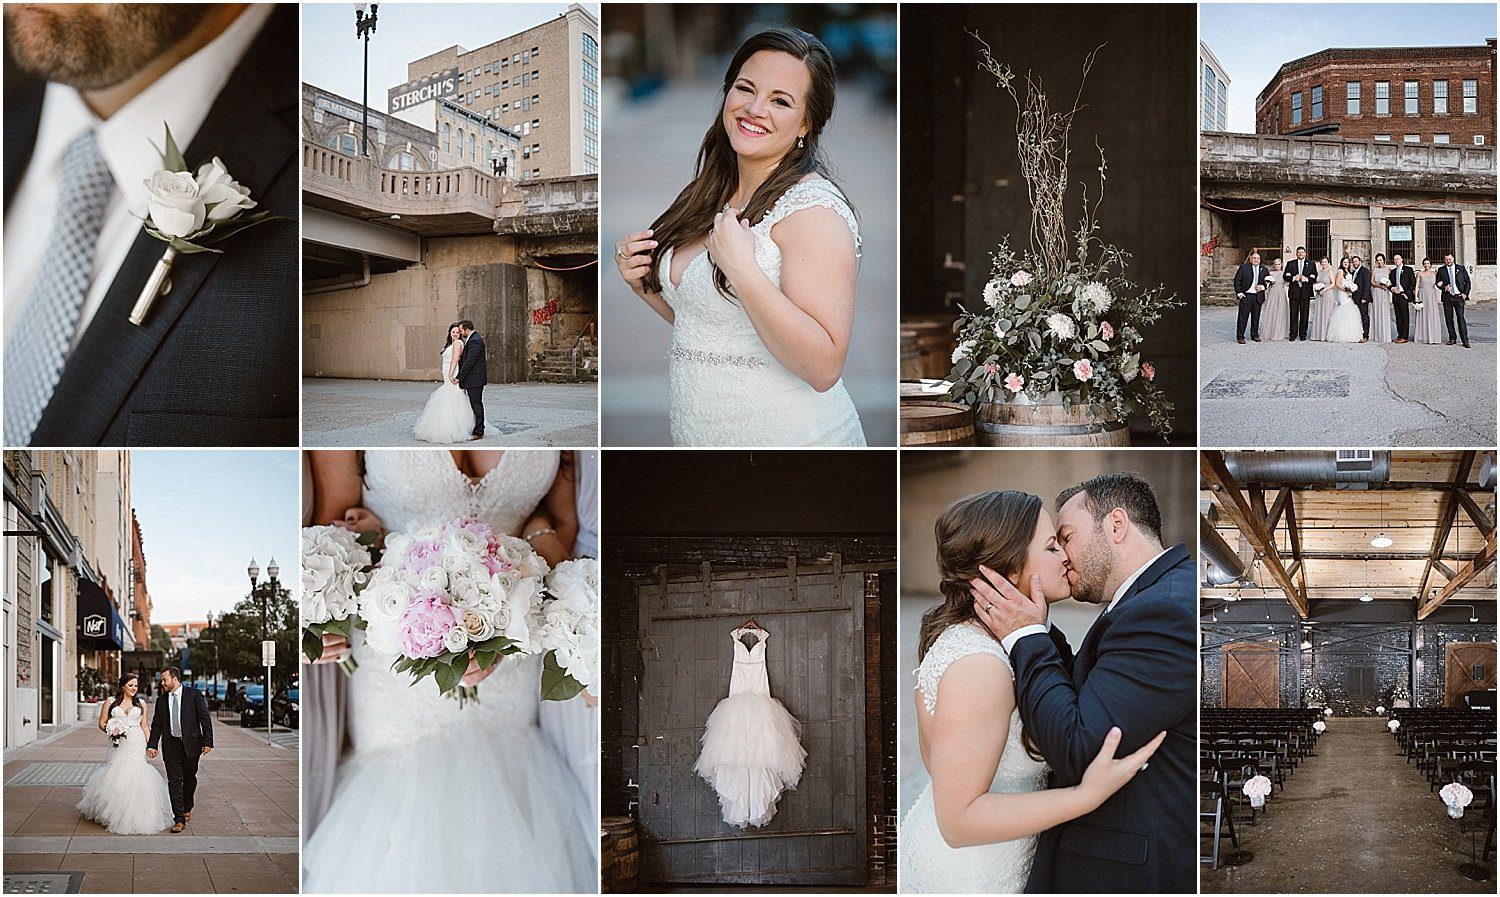 Jackson Terminal Wedding in Downtown Knoxville